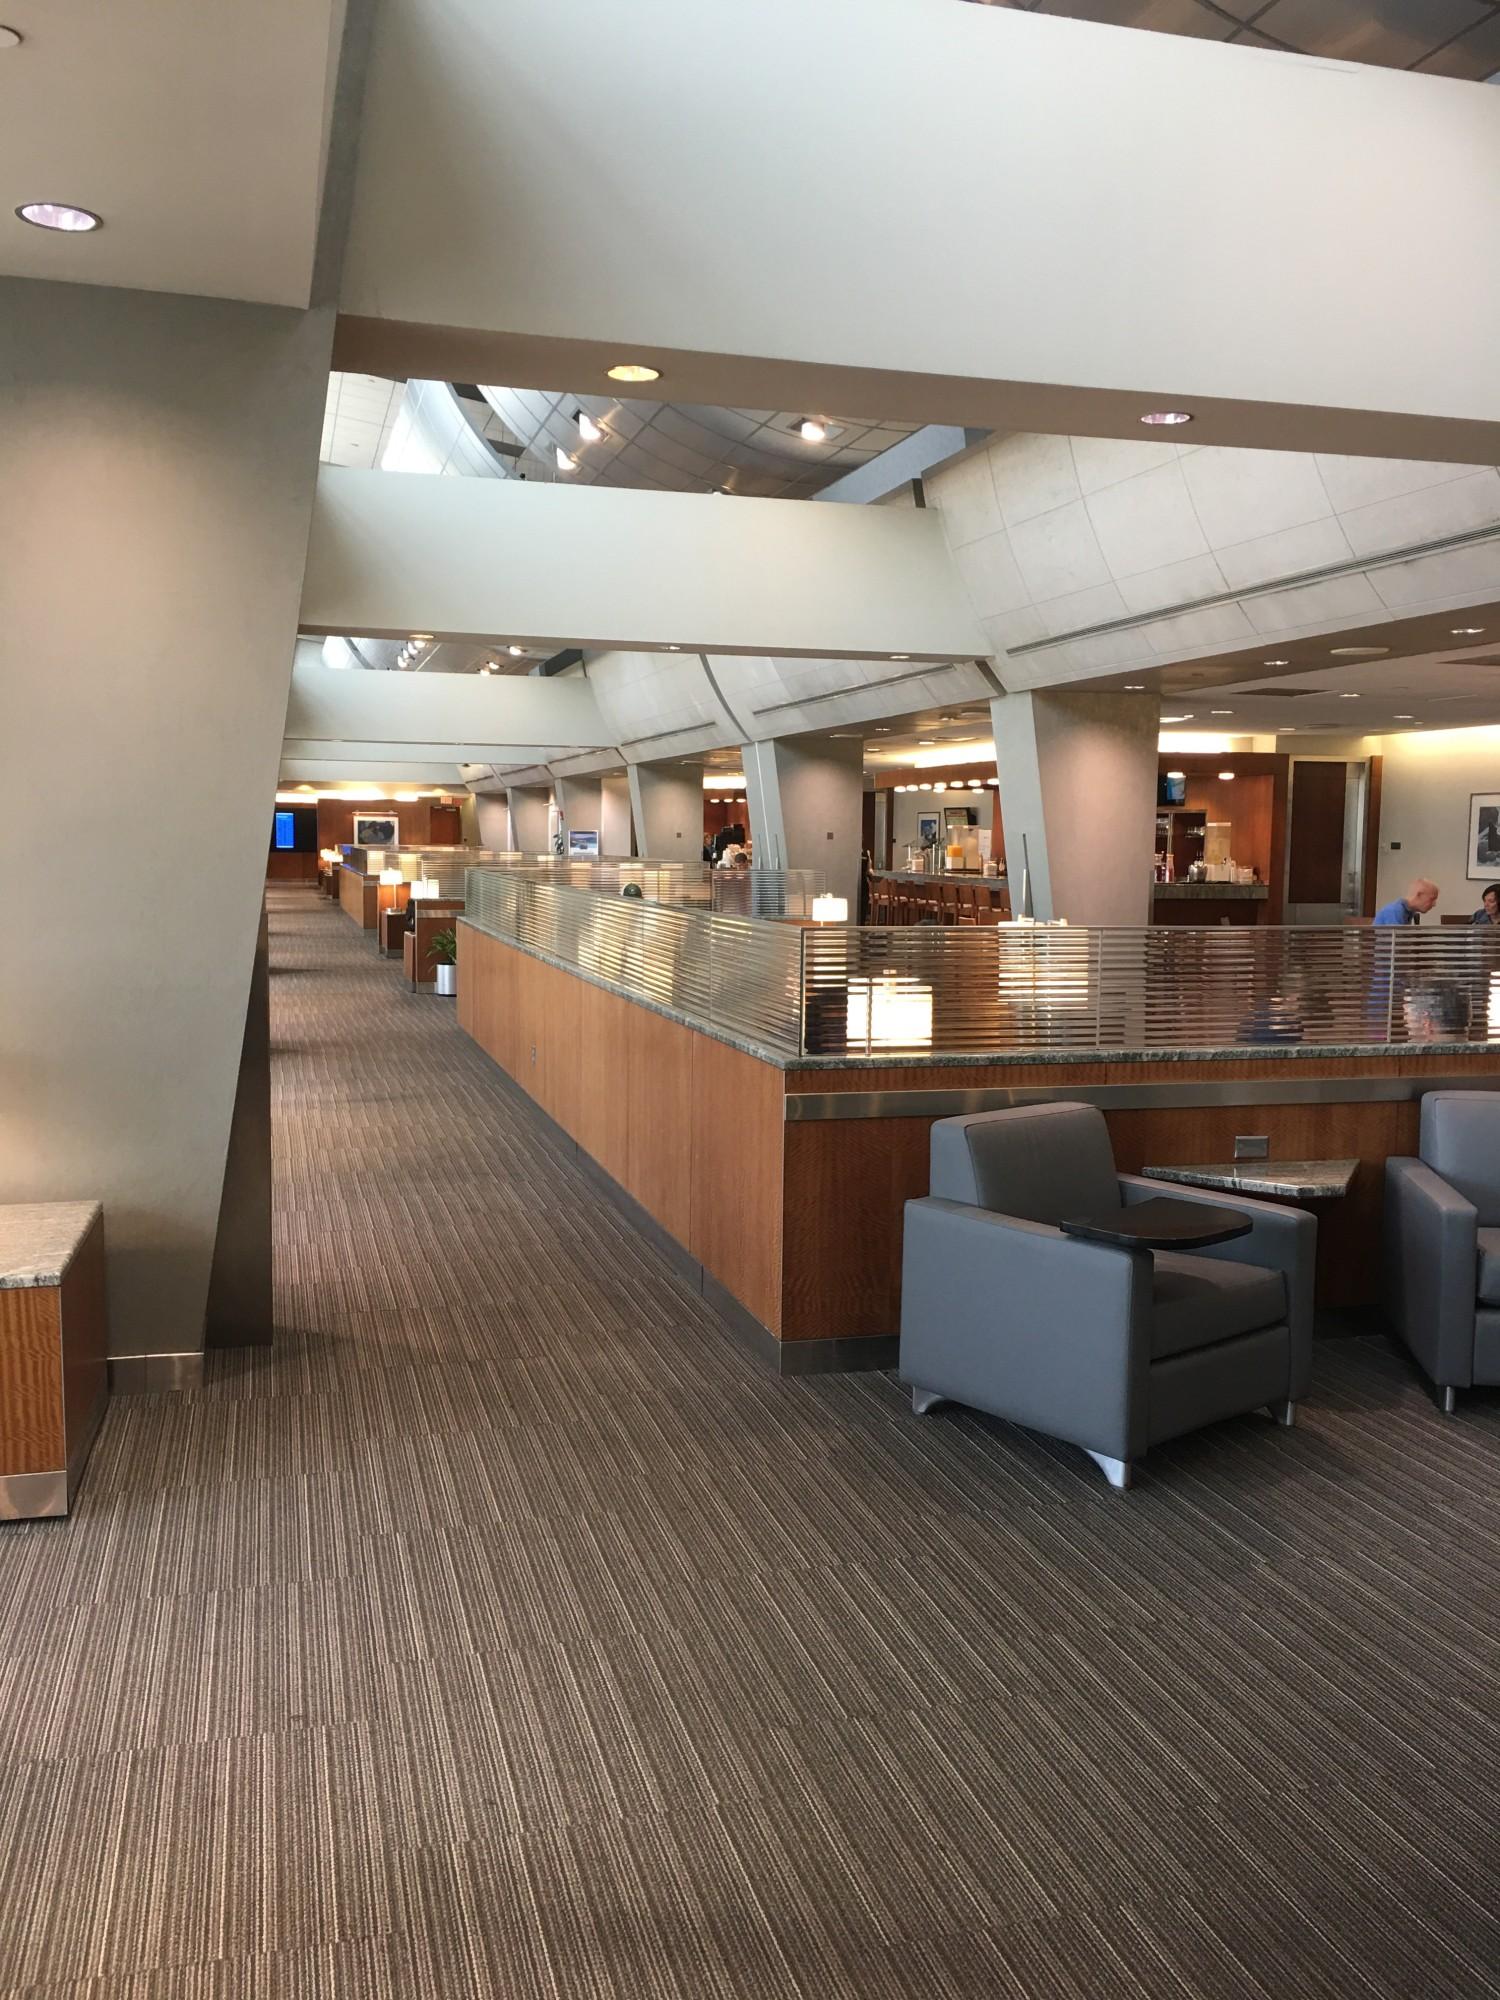 American Airlines Admirals Club image 29 of 48